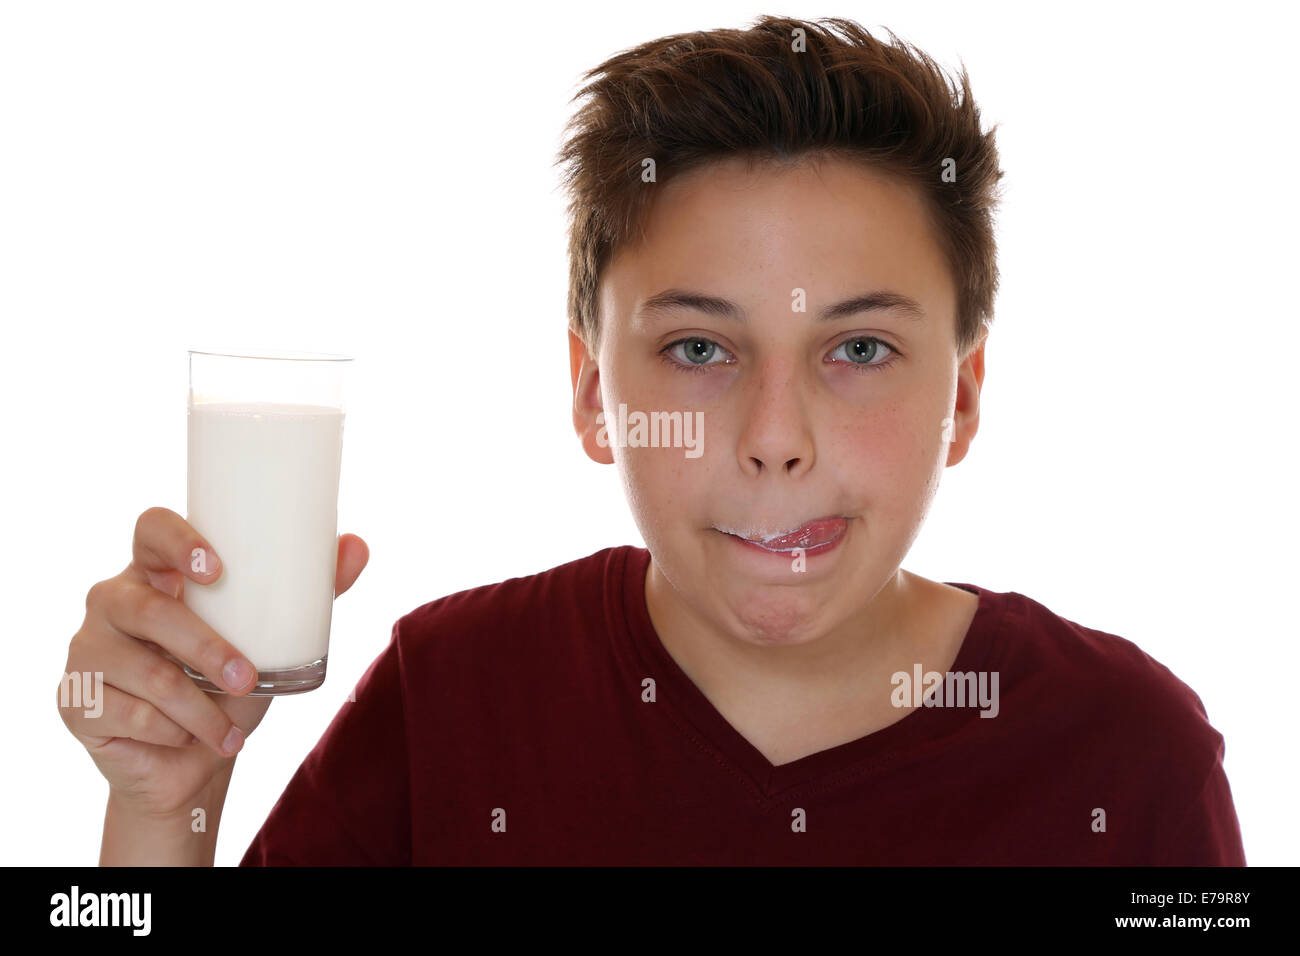 Healthy eating boy drinking milk and licking lips, isolated on a white background Stock Photo